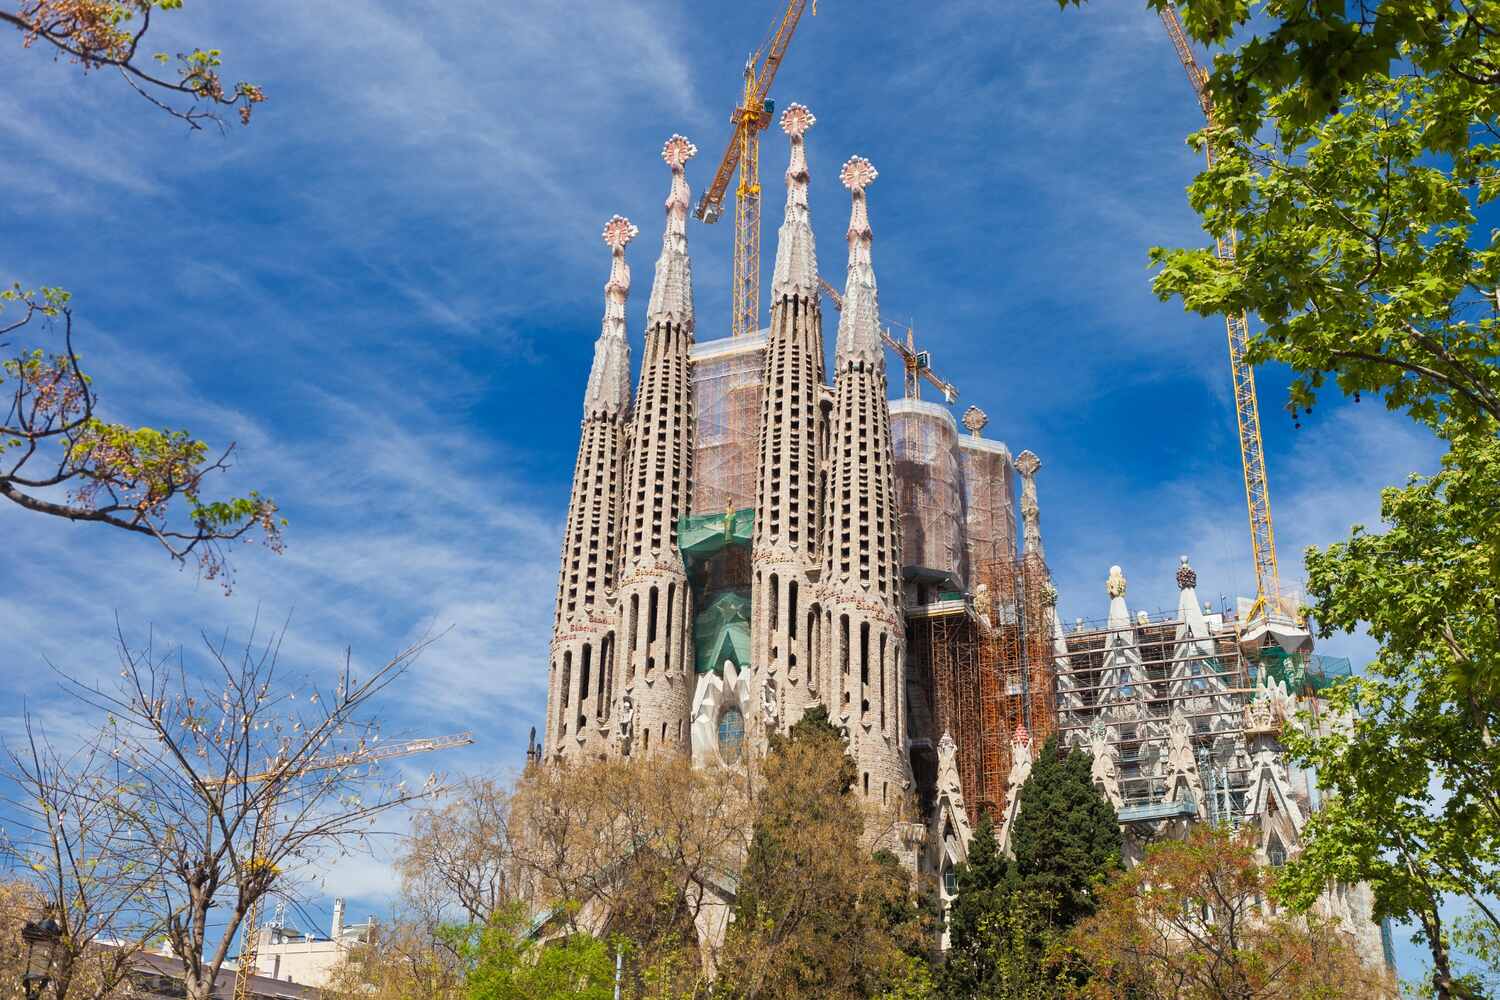 Wide view of La Sagrada Familia's towers and cranes against a blue sky, showcasing ongoing construction